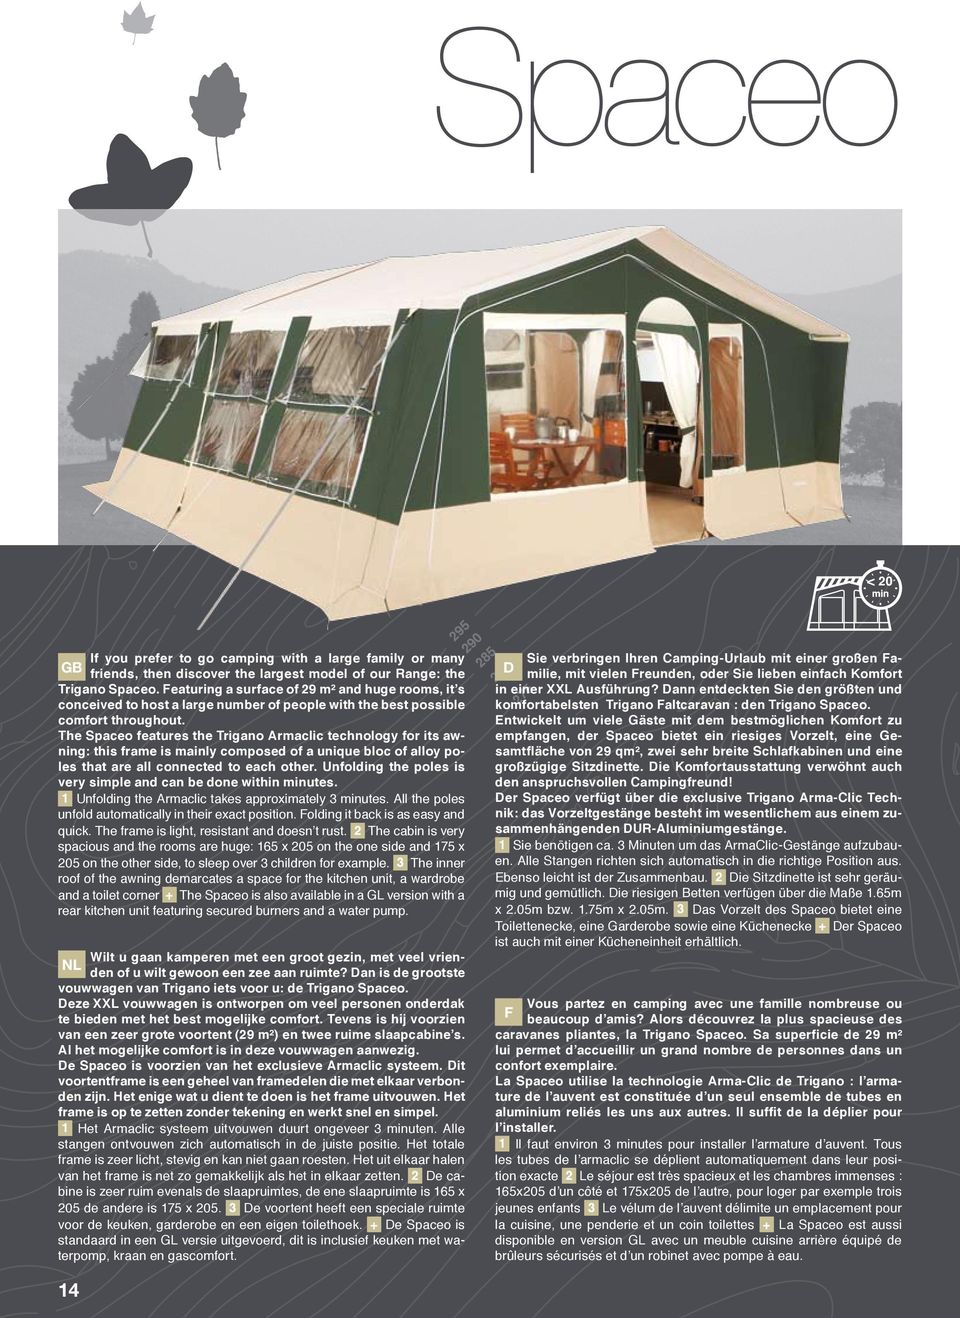 The Spaceo features the Trigano Armaclic technology for its awning: this frame is mainly composed of a unique bloc of alloy poles that are all connected to each other.